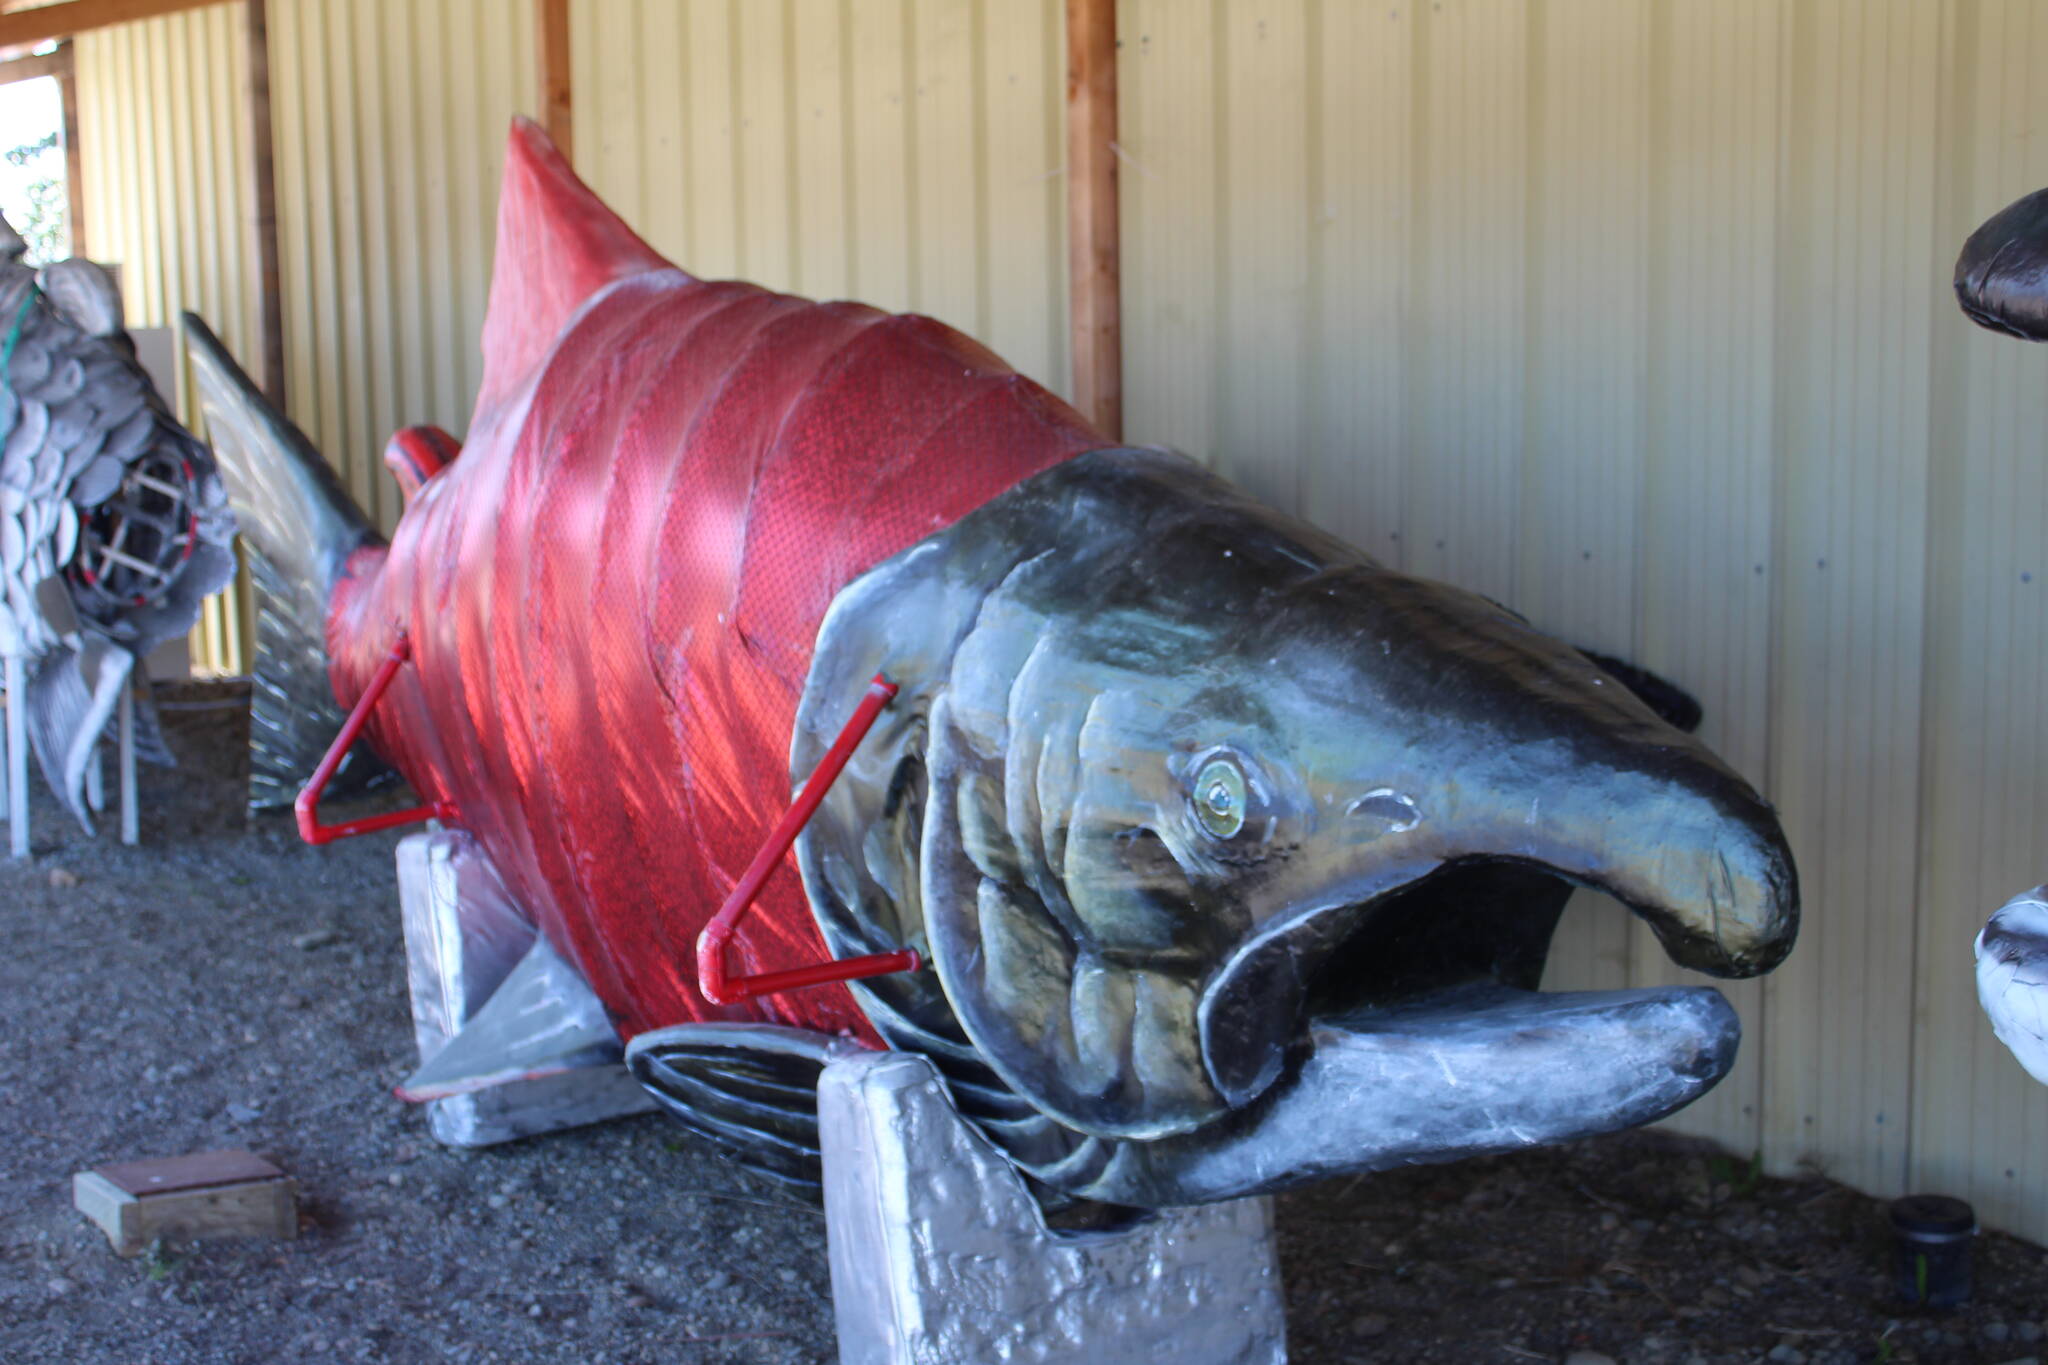 A salmon art installation waits to be hoisted in Ninilchik, Alaska, on Friday, Aug. 5, 2022 for Salmonfest, an annual event that raises awareness about salmon-related causes. (Ashlyn O’Hara/Peninsula Clarion)